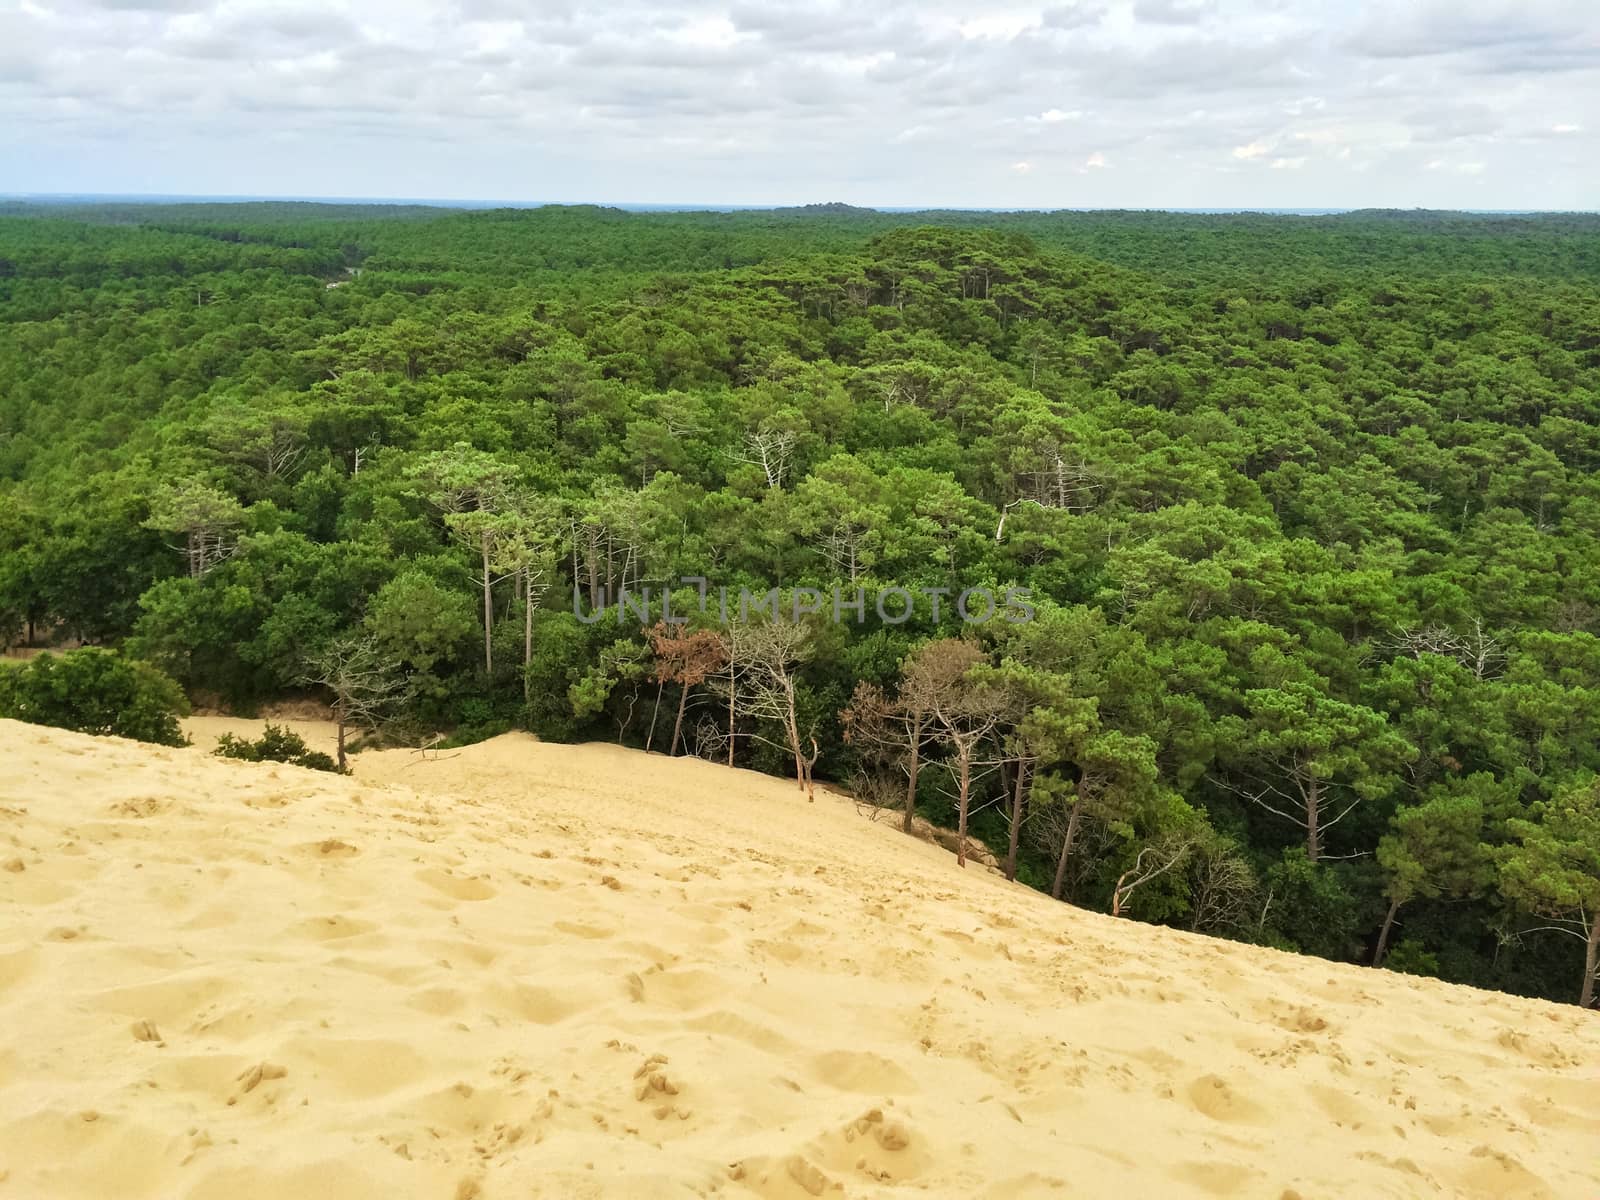 View from the top of Dune du Pilat. Dune of Pilat, the tallest sand dune in Europe, located in the Arcachon Bay area, France.